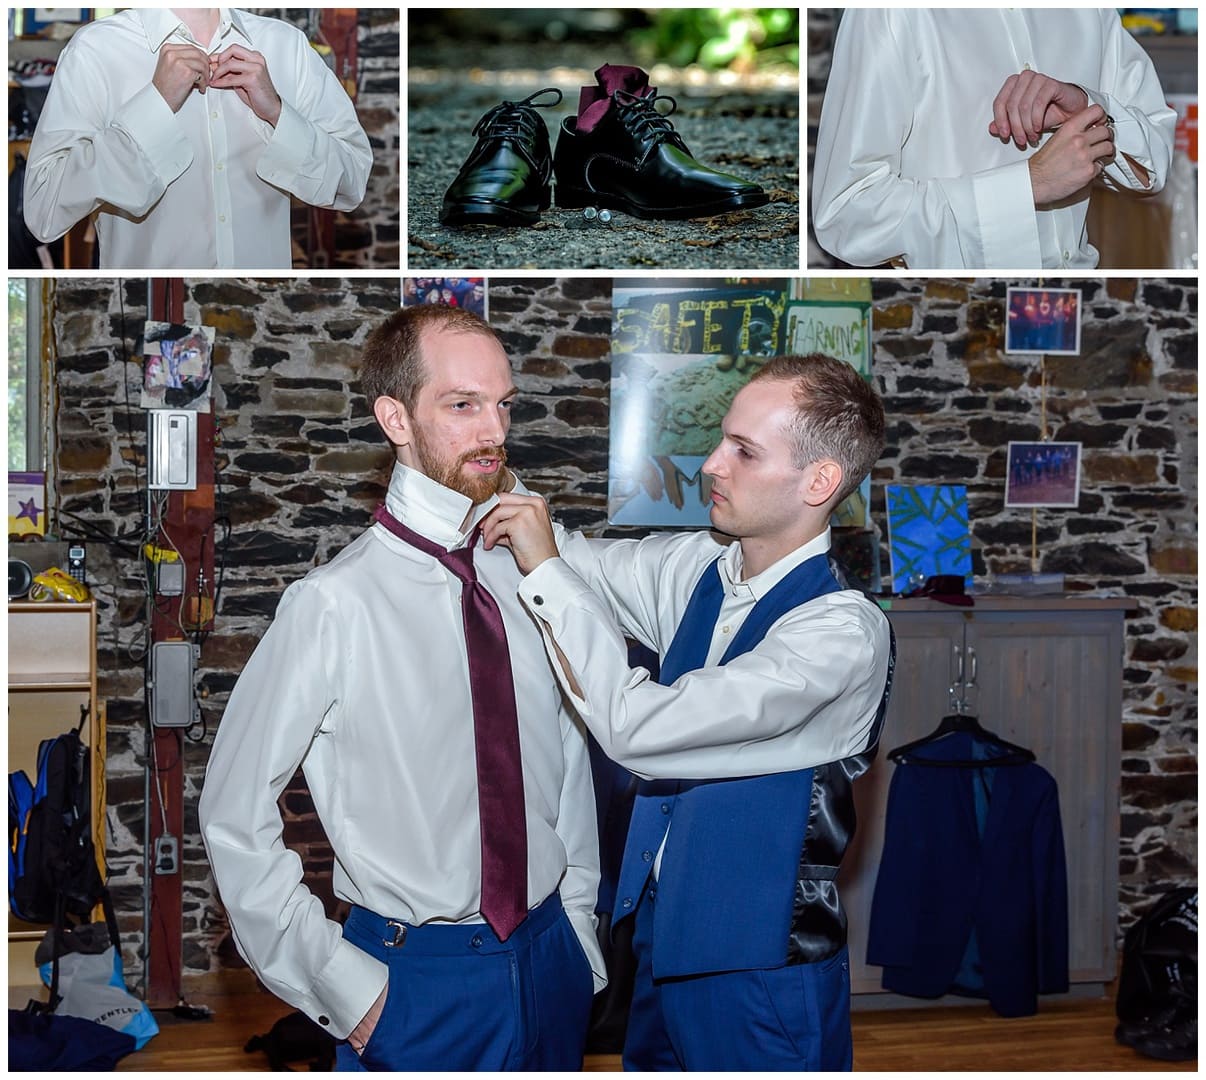 The groom getting ready with his groomsmen for his wedding day at the Adventure Center where they first met at Sir Sandford Fleming Park in Halifax, NS.